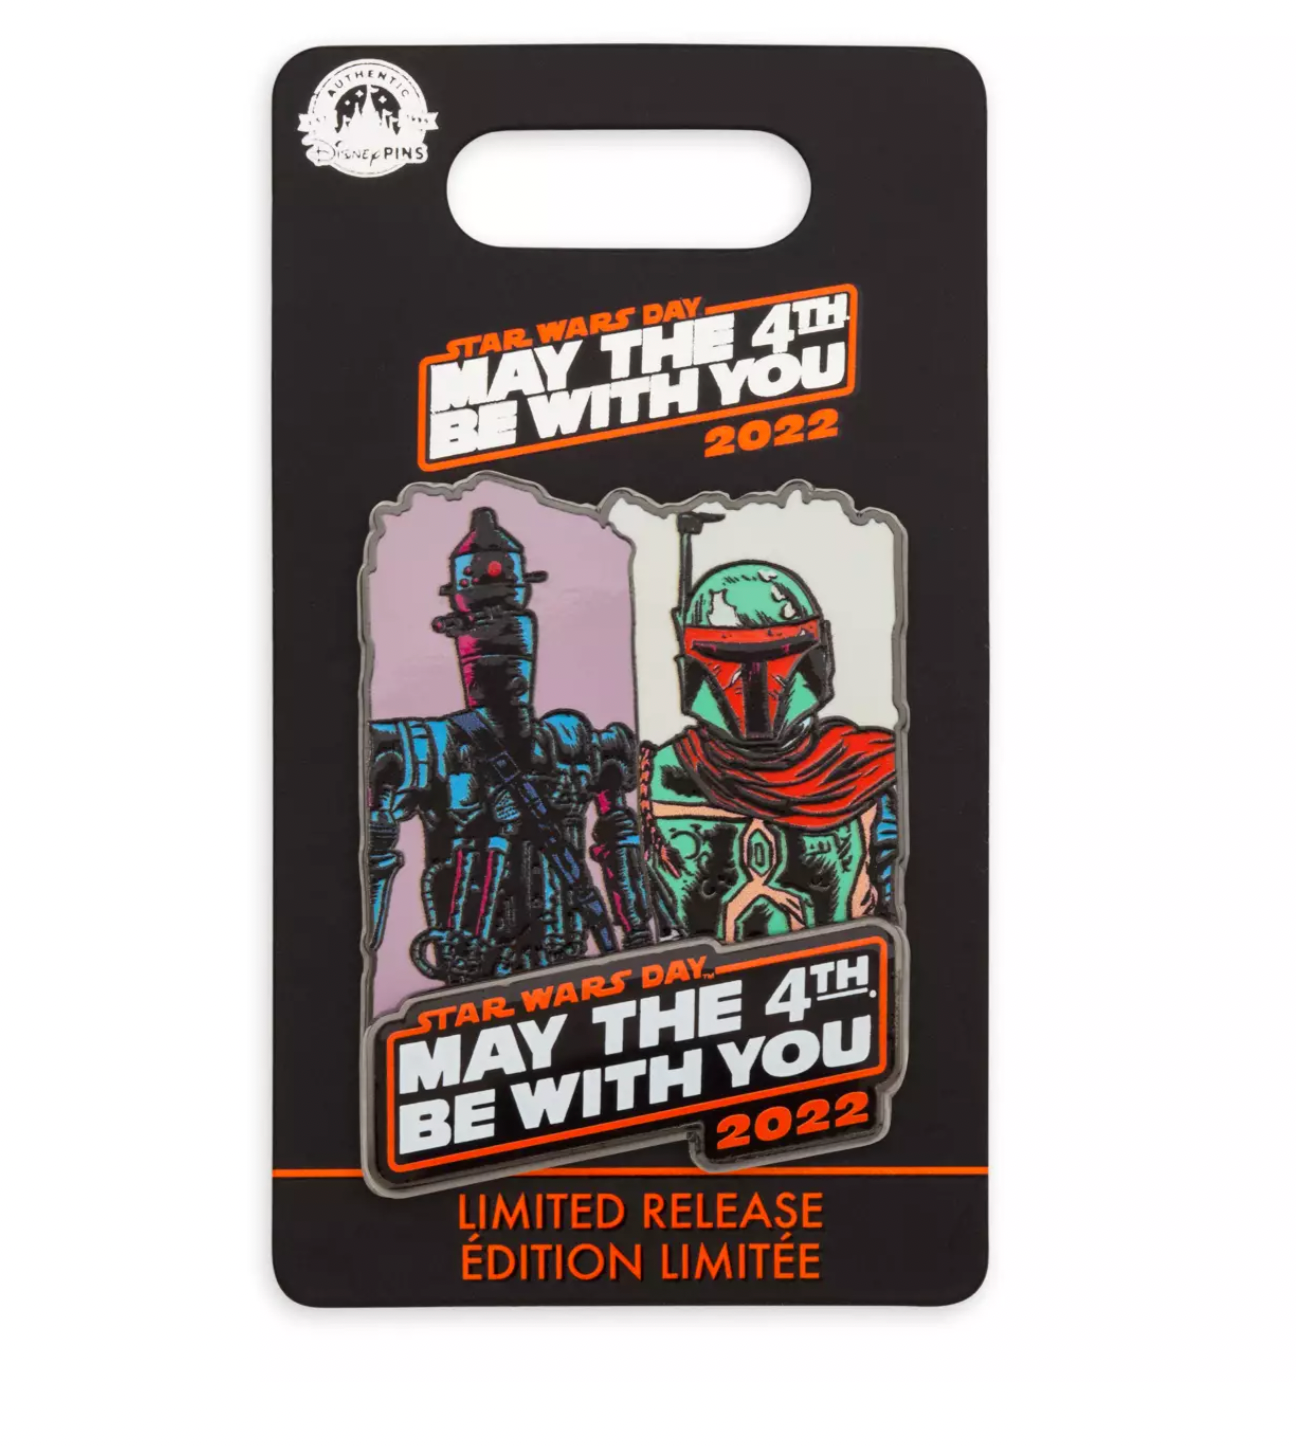 Disney Star Wars May the 4th Be With You 2022 Boba Fett IG-88 Pin Limited New